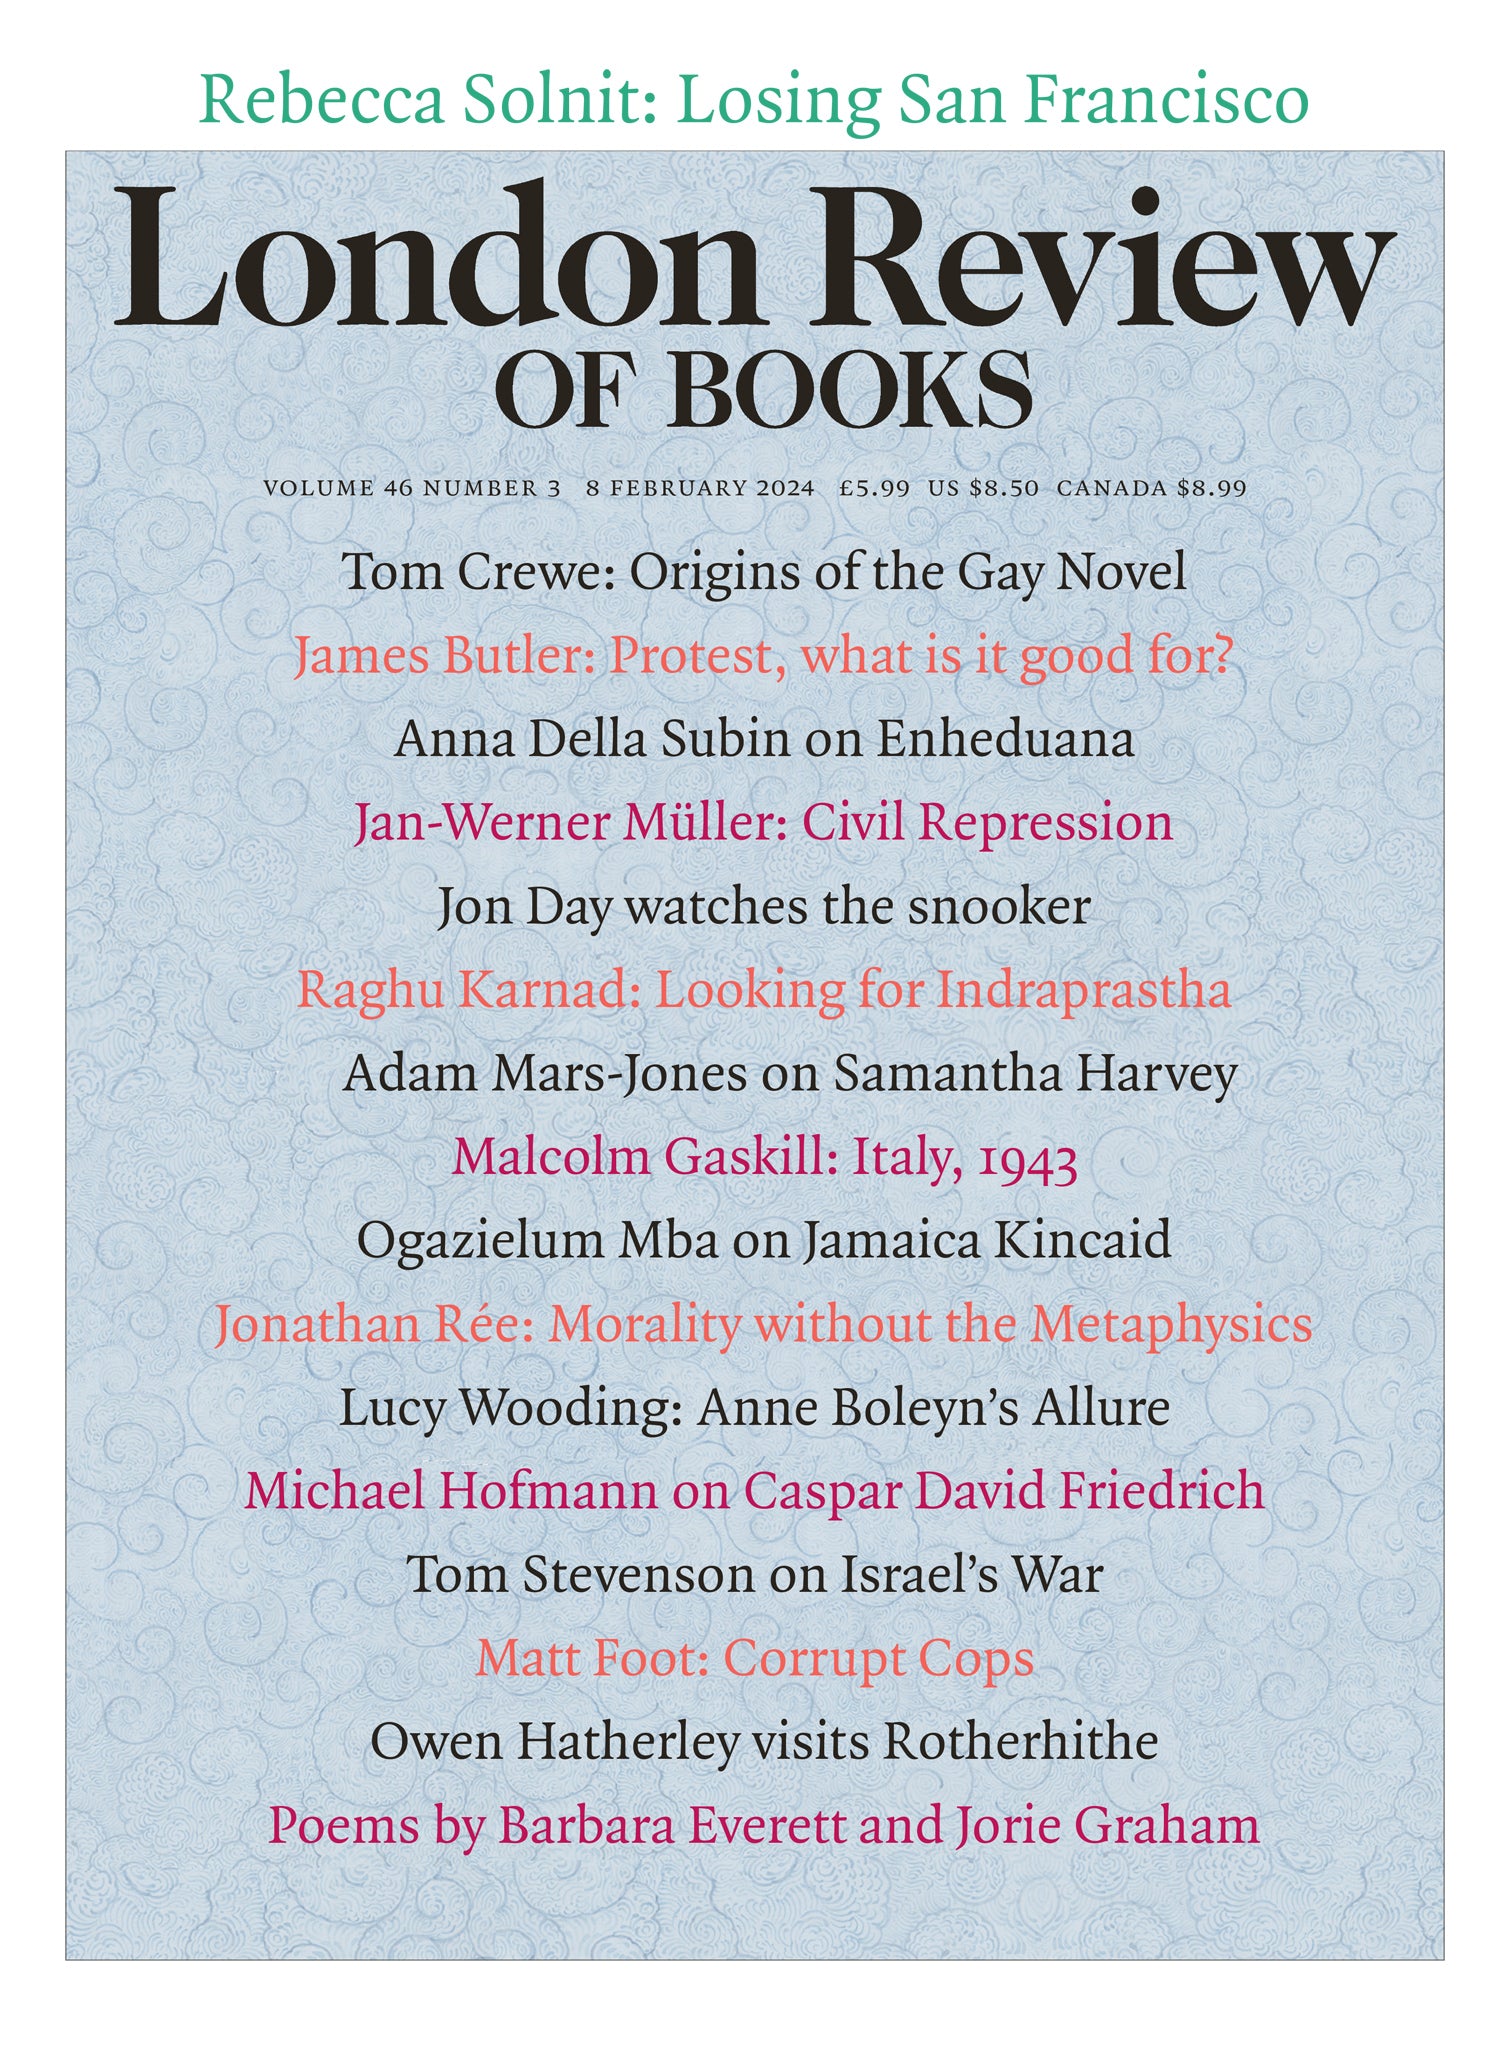 London Review of Books, February 8 2024